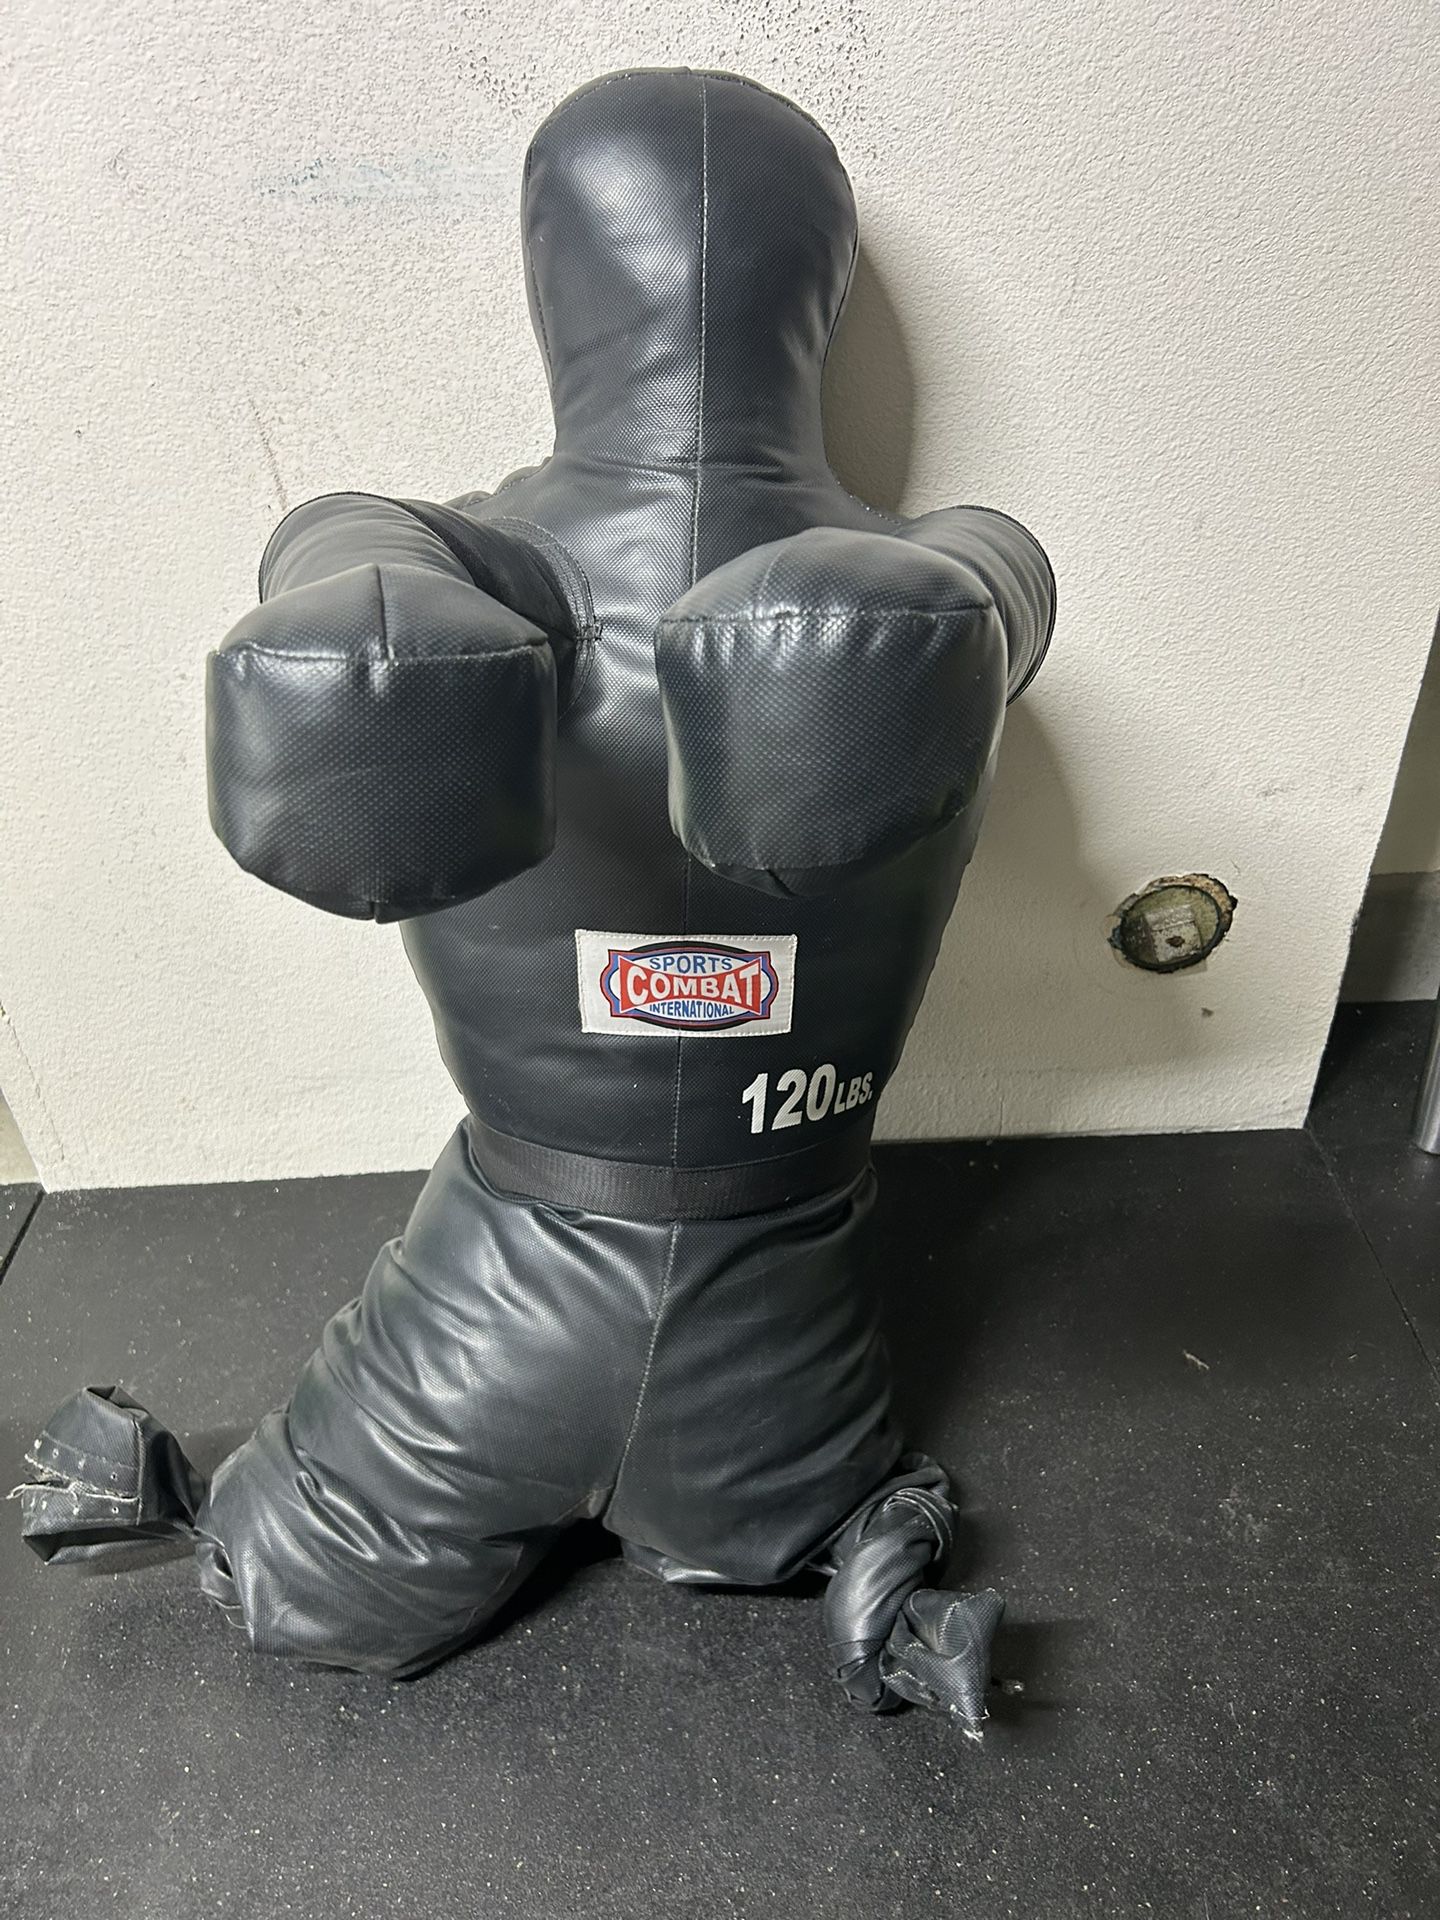 Work Out Dummy for Sale in San Diego, CA - OfferUp